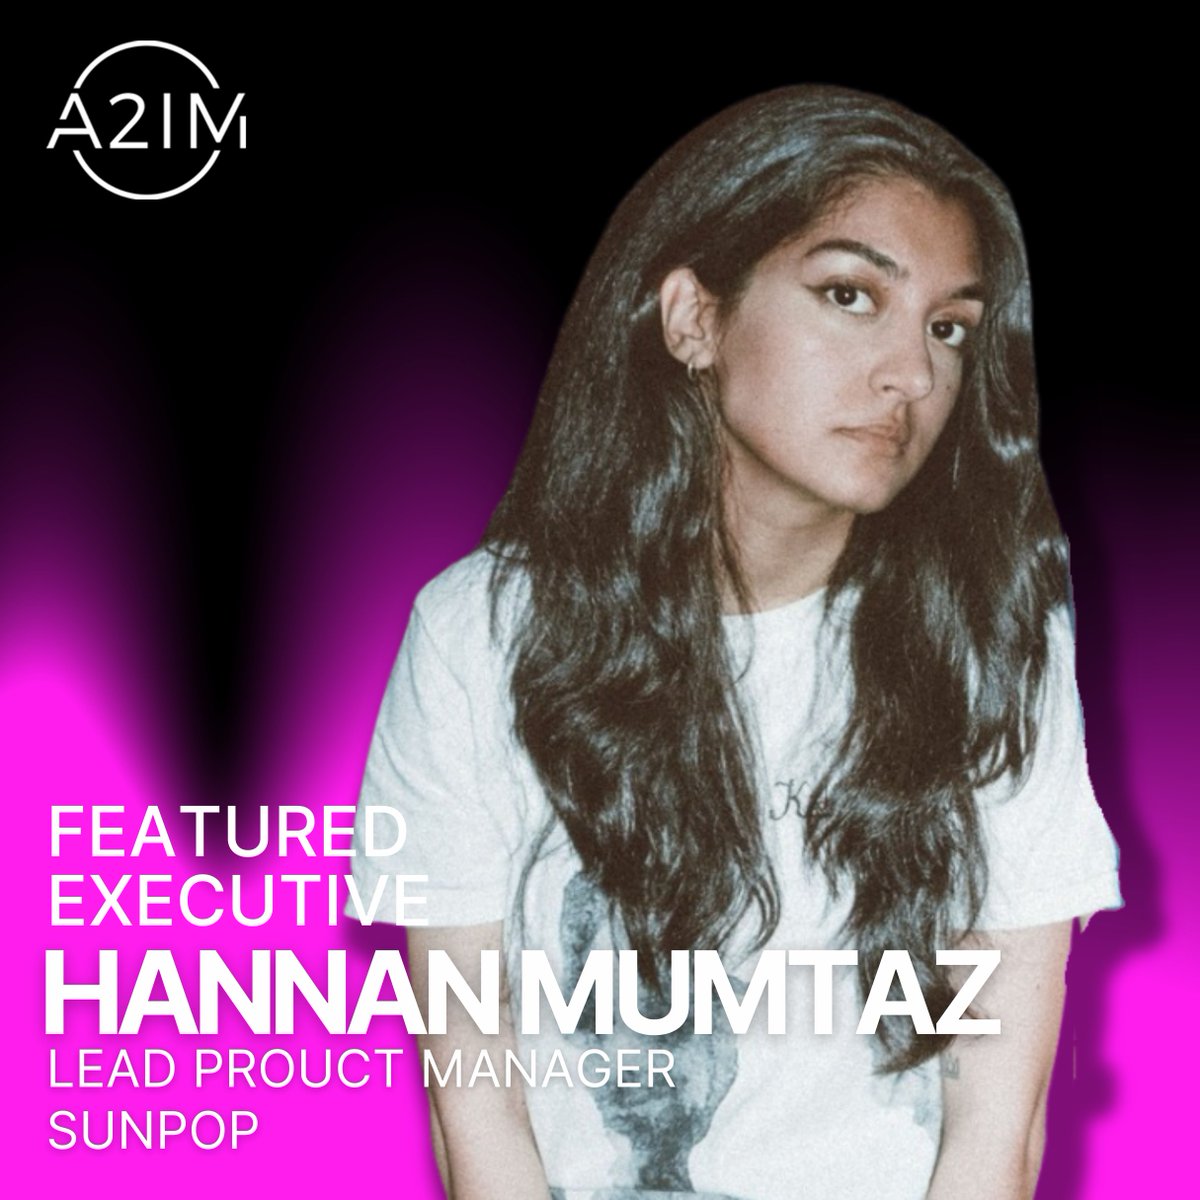 Meet this week's Featured Executive, @HannanMumtaz of @SunPopMusic ☀️ Hannan explains how she cold-emailed and artist-managed her way into the music industry, leading her to work with some of her favorite artists today! 🔗Read the full interview here: bit.ly/4axkwAk